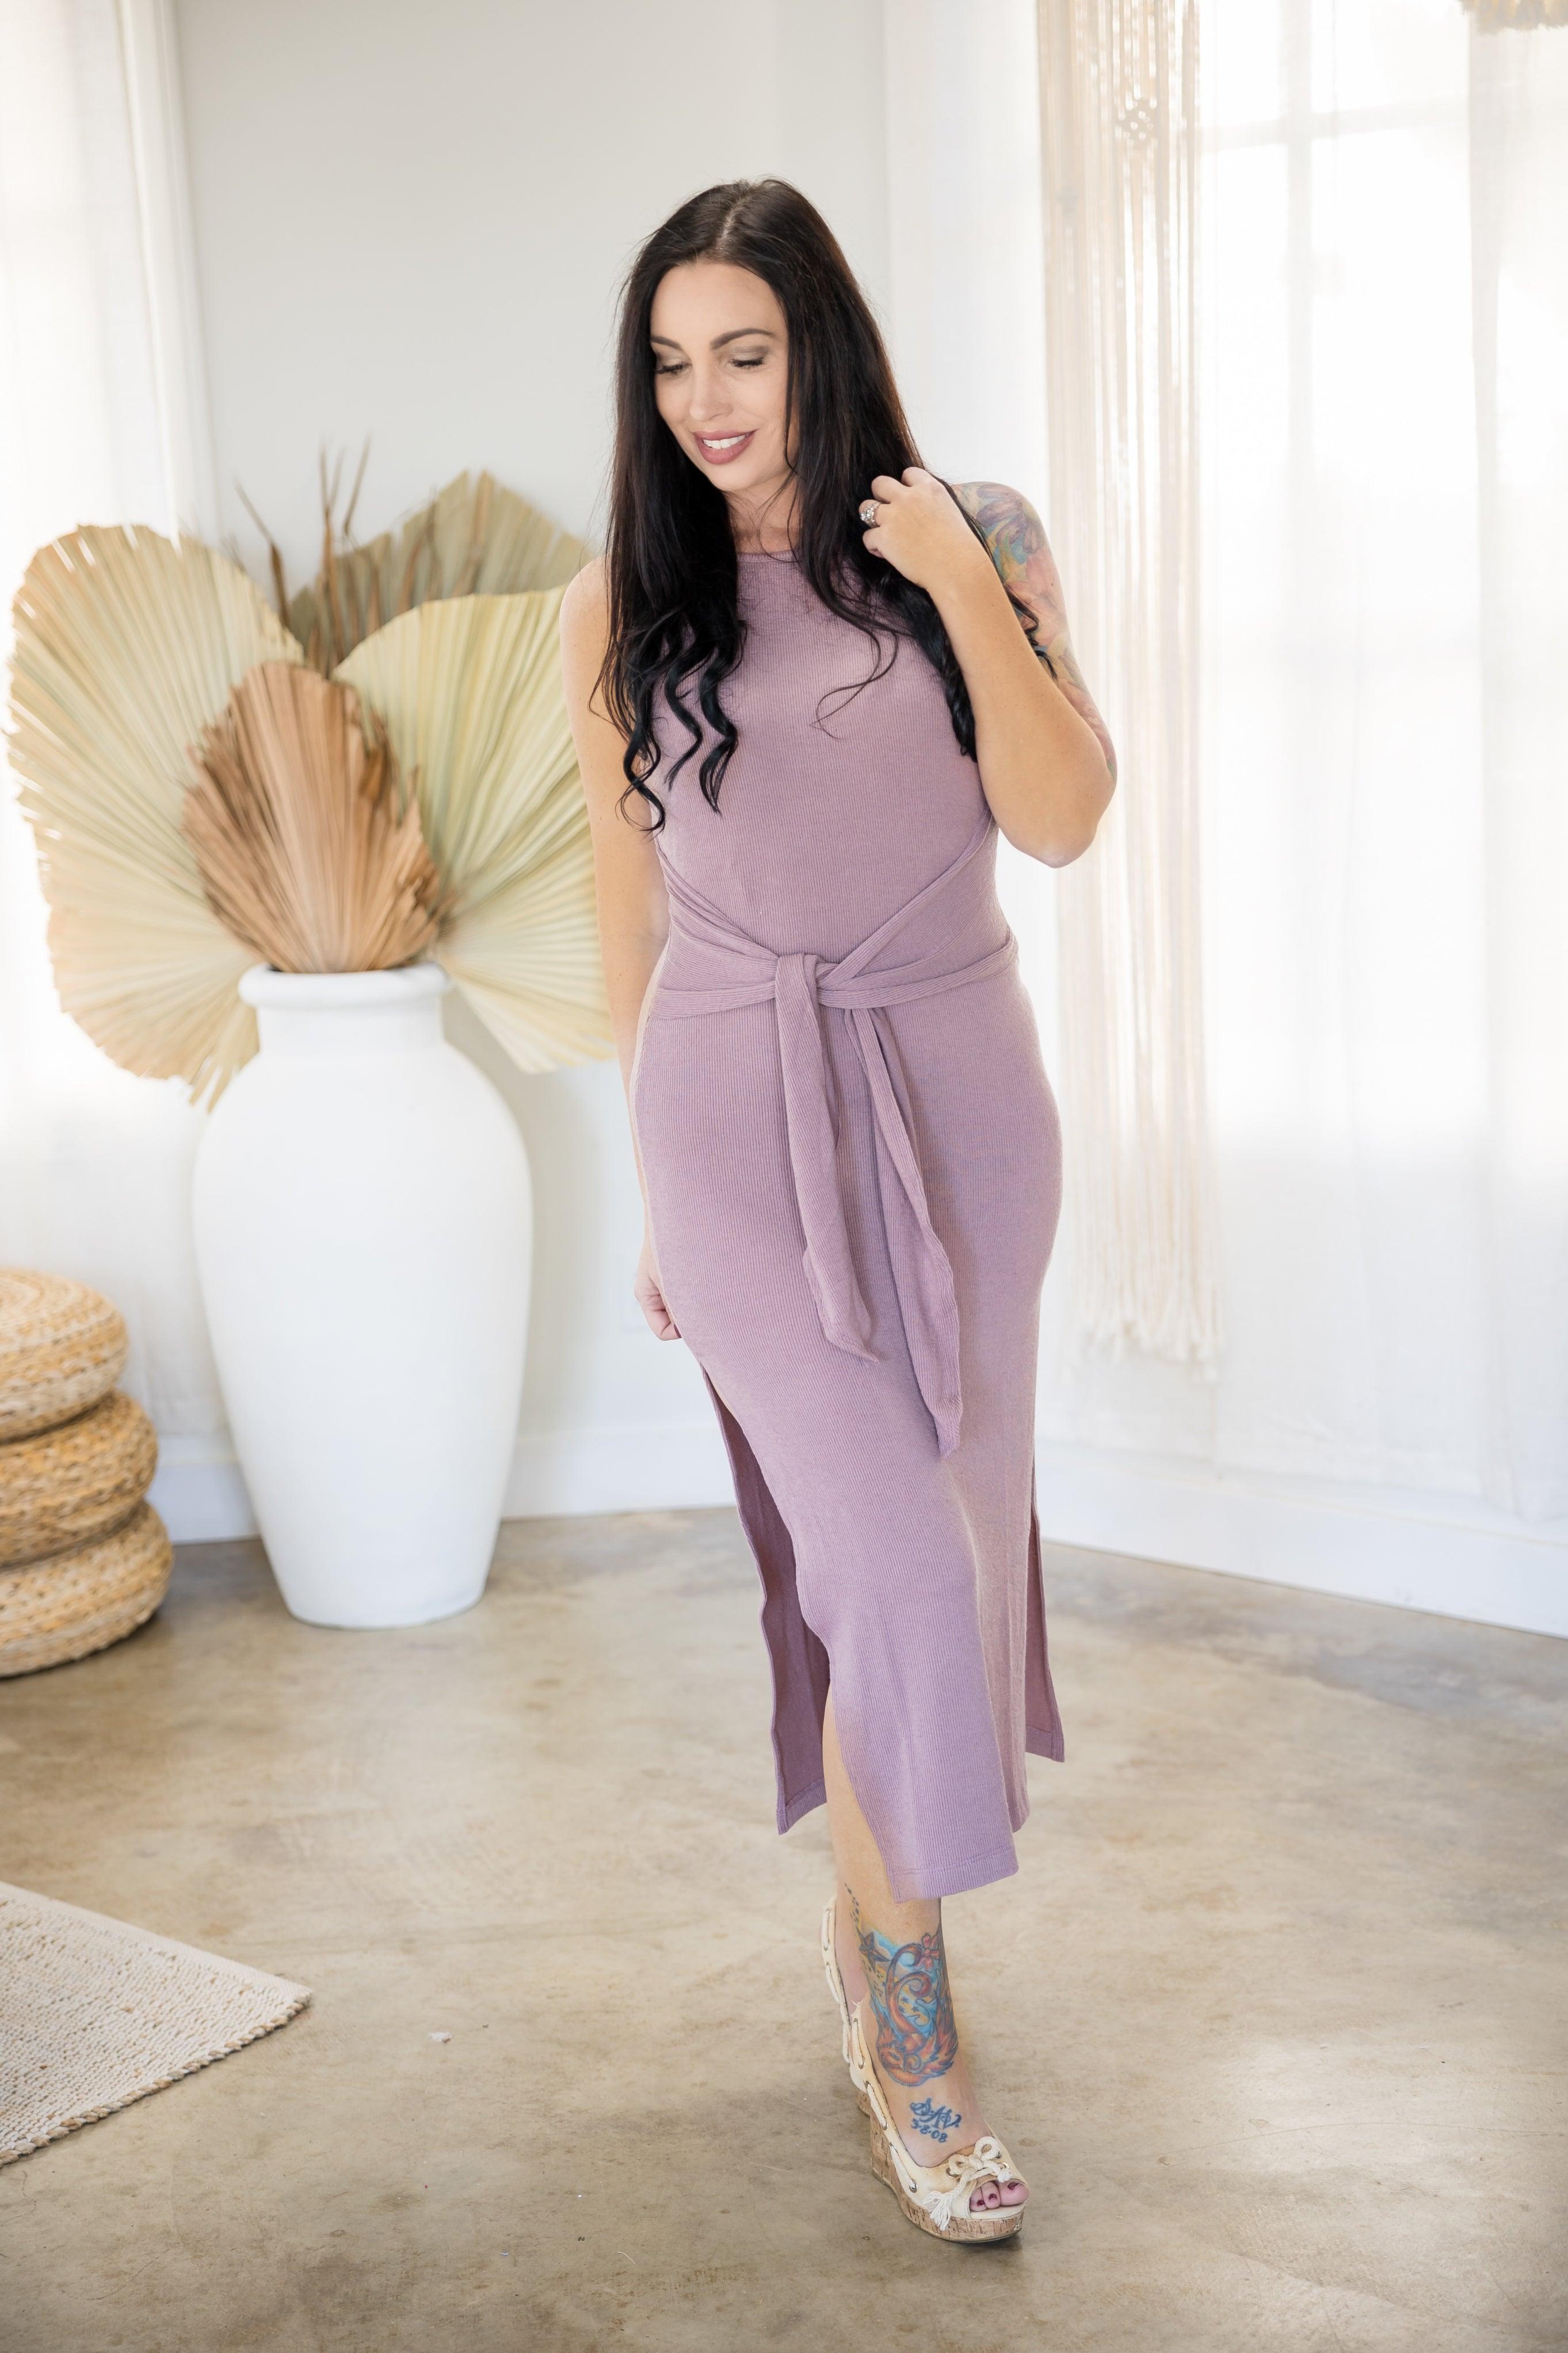 Knot Your Average Maxi - Dusty Rose Giftmas Boutique Simplified   